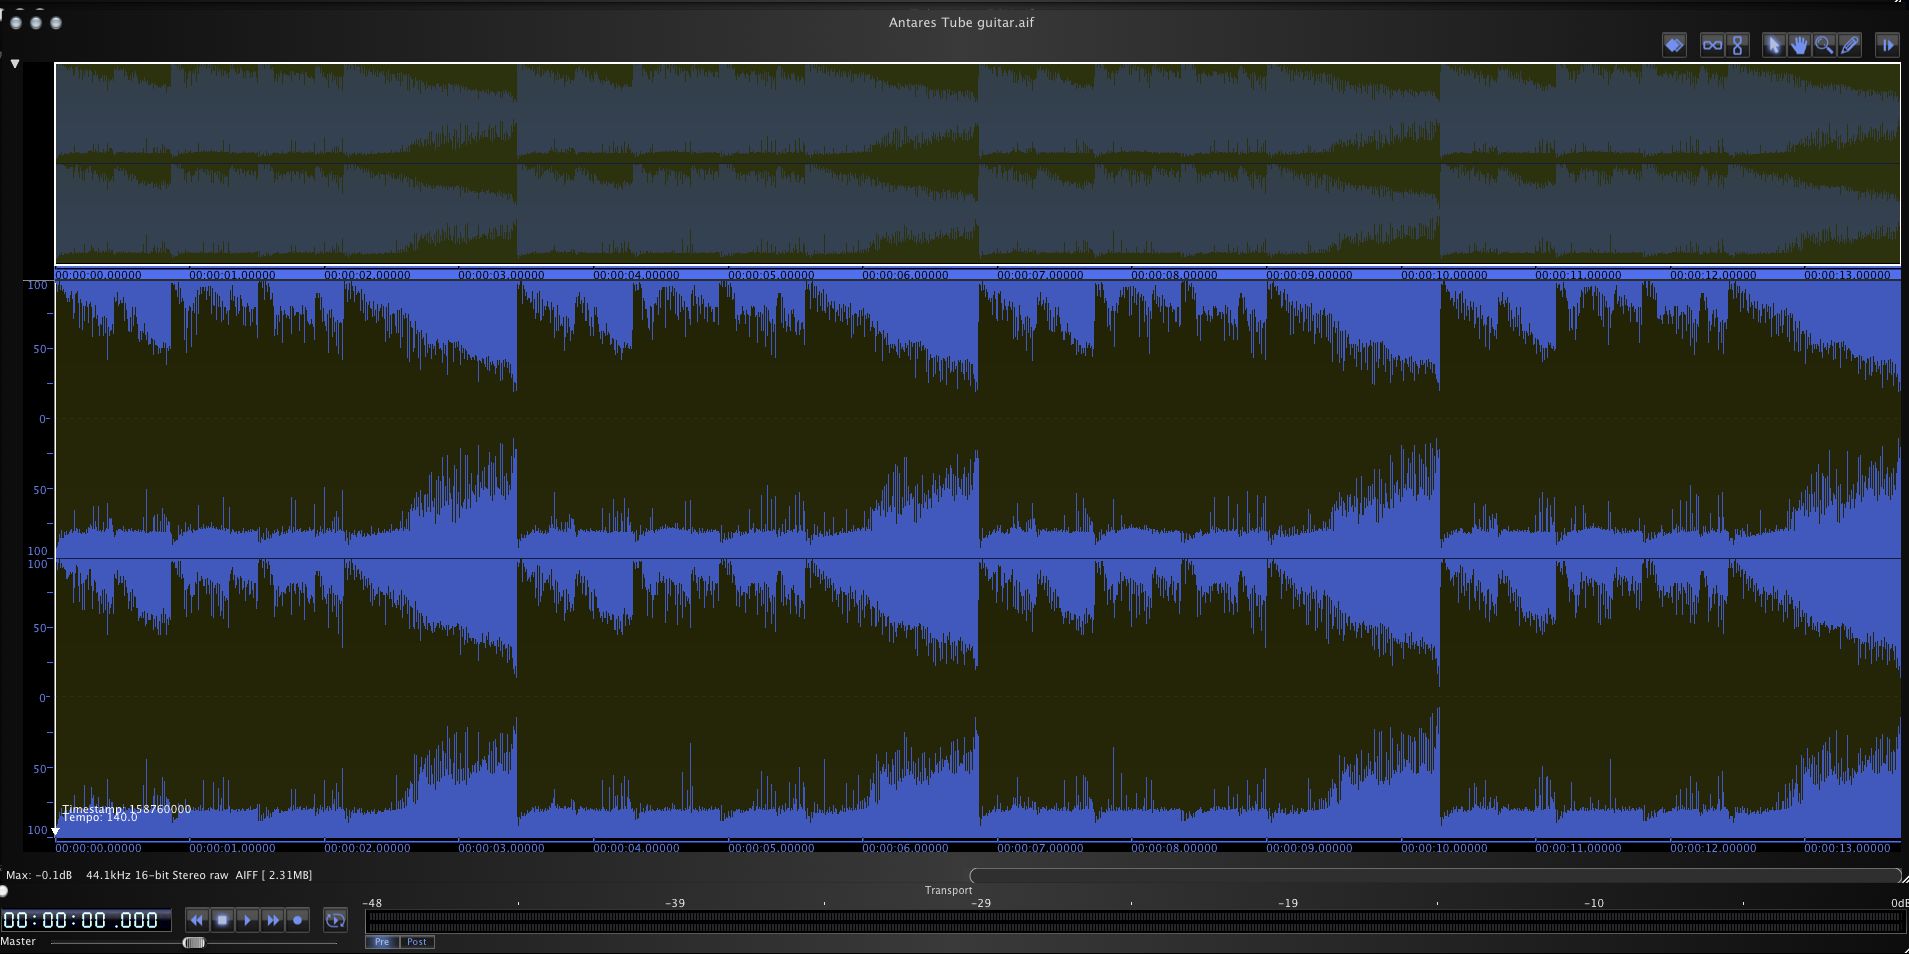 Pic 1b: The same audio with distortion applied, clearly showing the reduced dynamic range